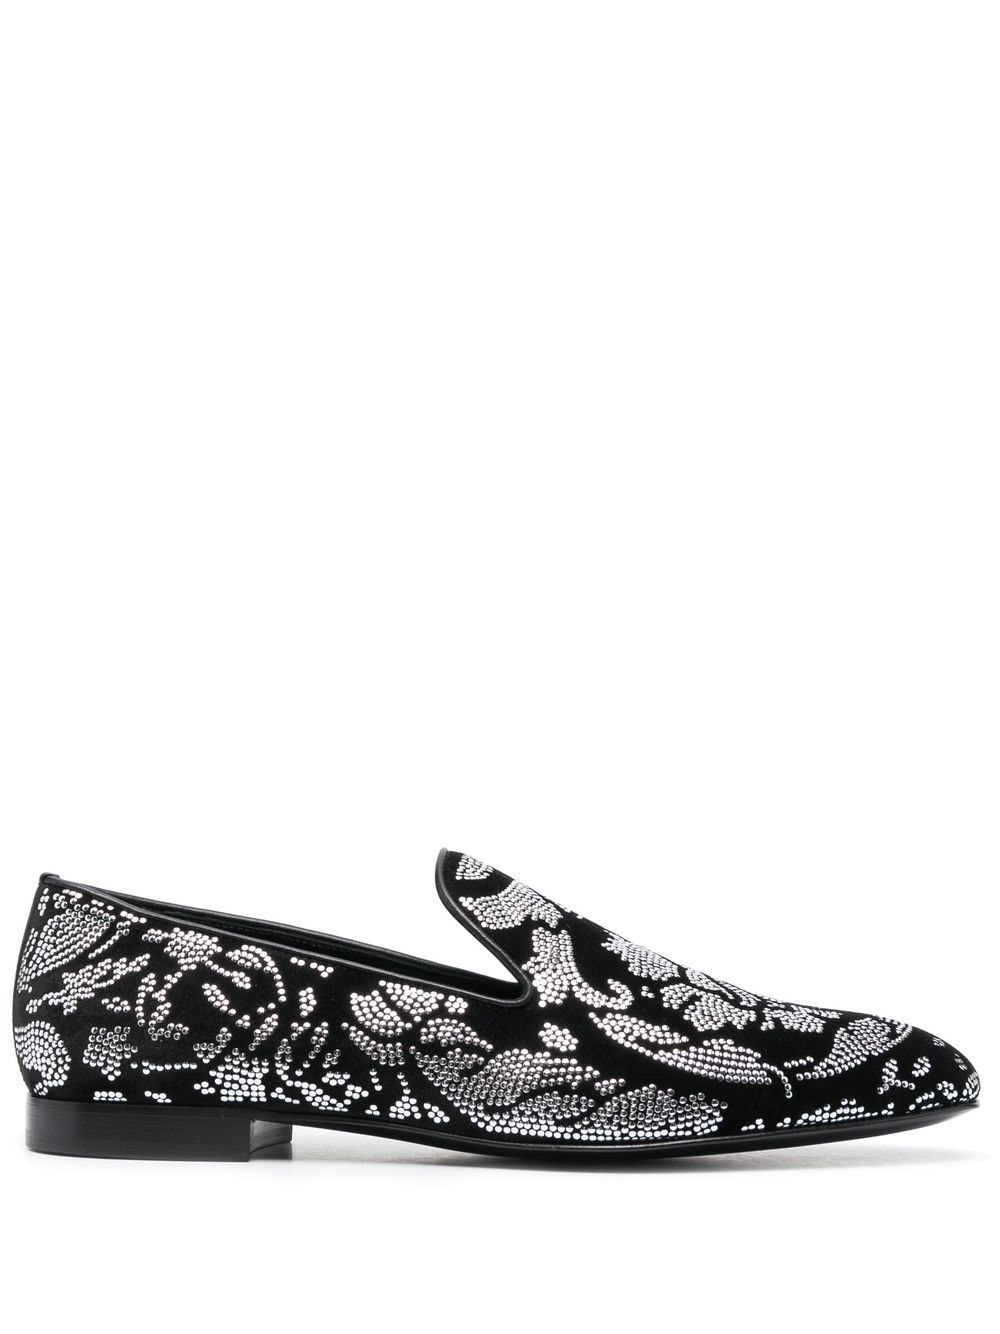 Versace baroque-studded loafers - Black